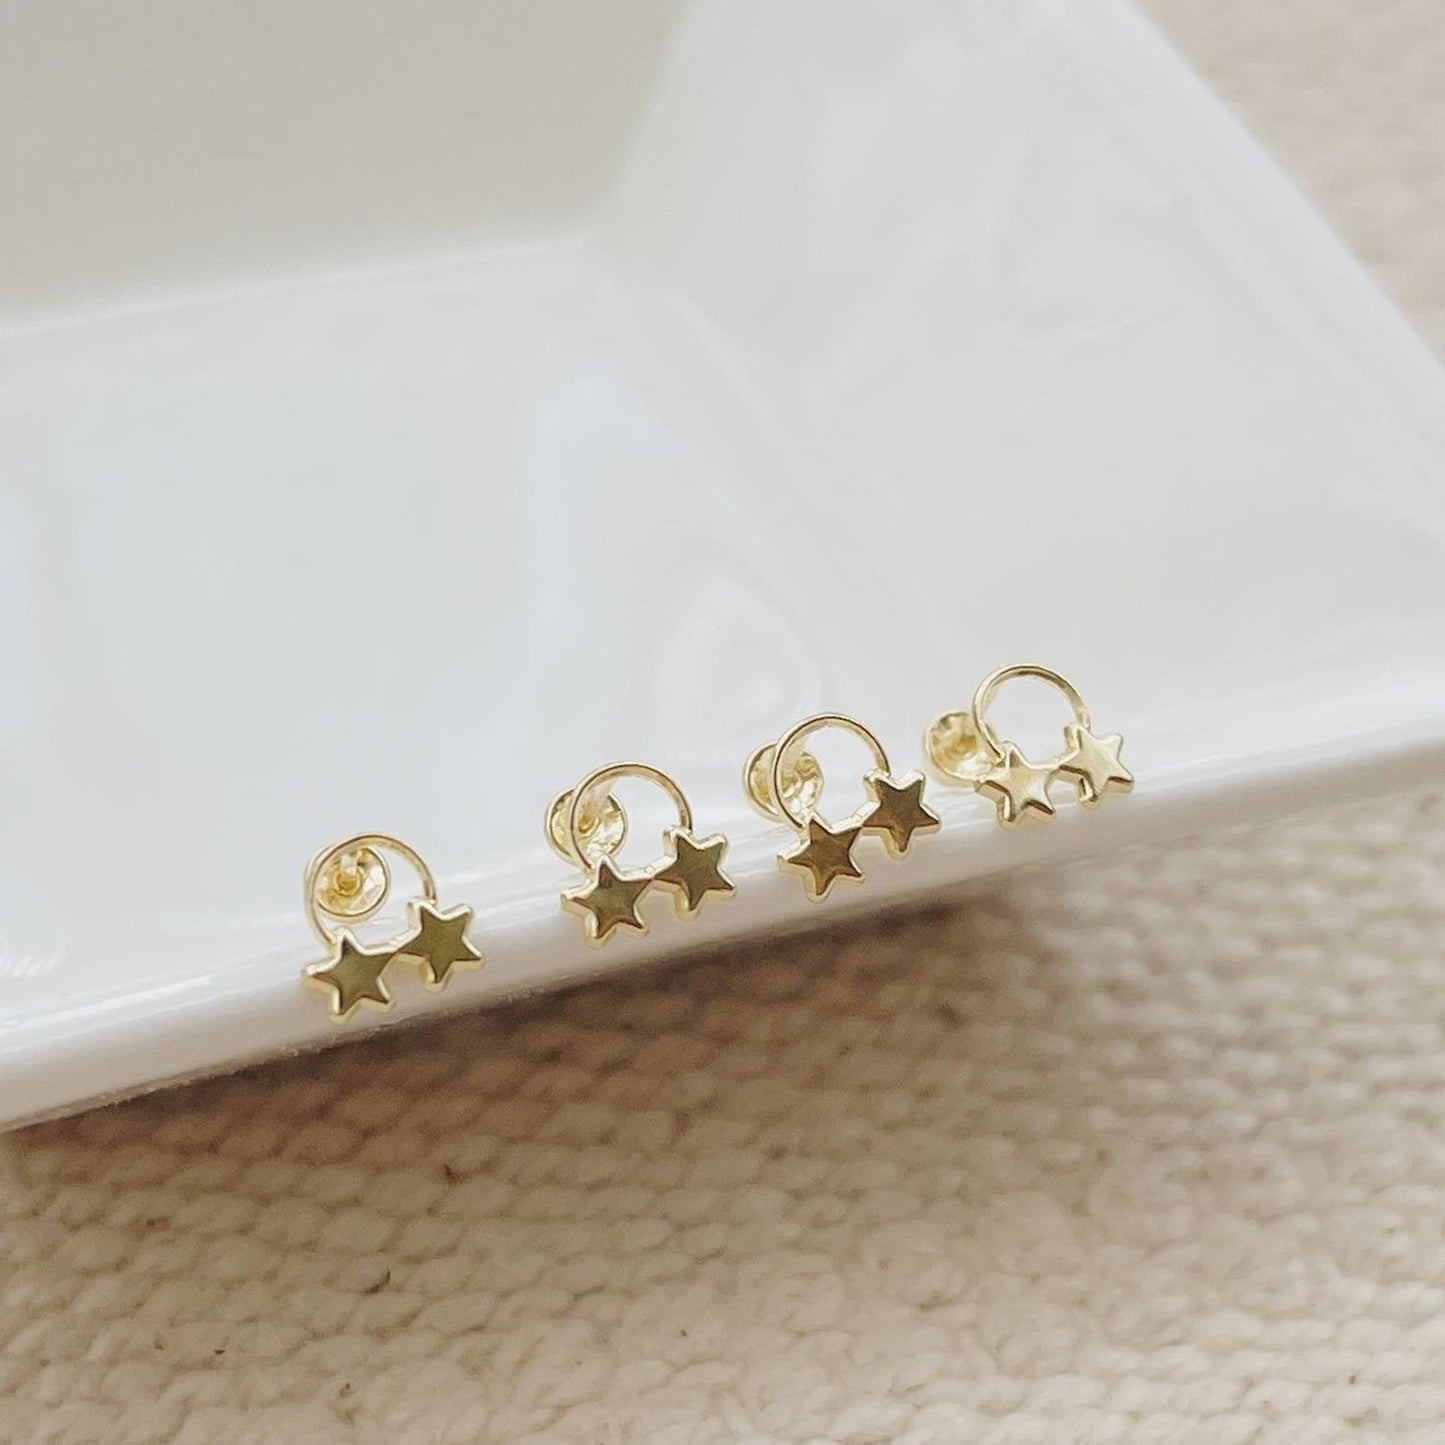 A gold stud earring for everyday wear, these modern circle stars are simple and classic. 